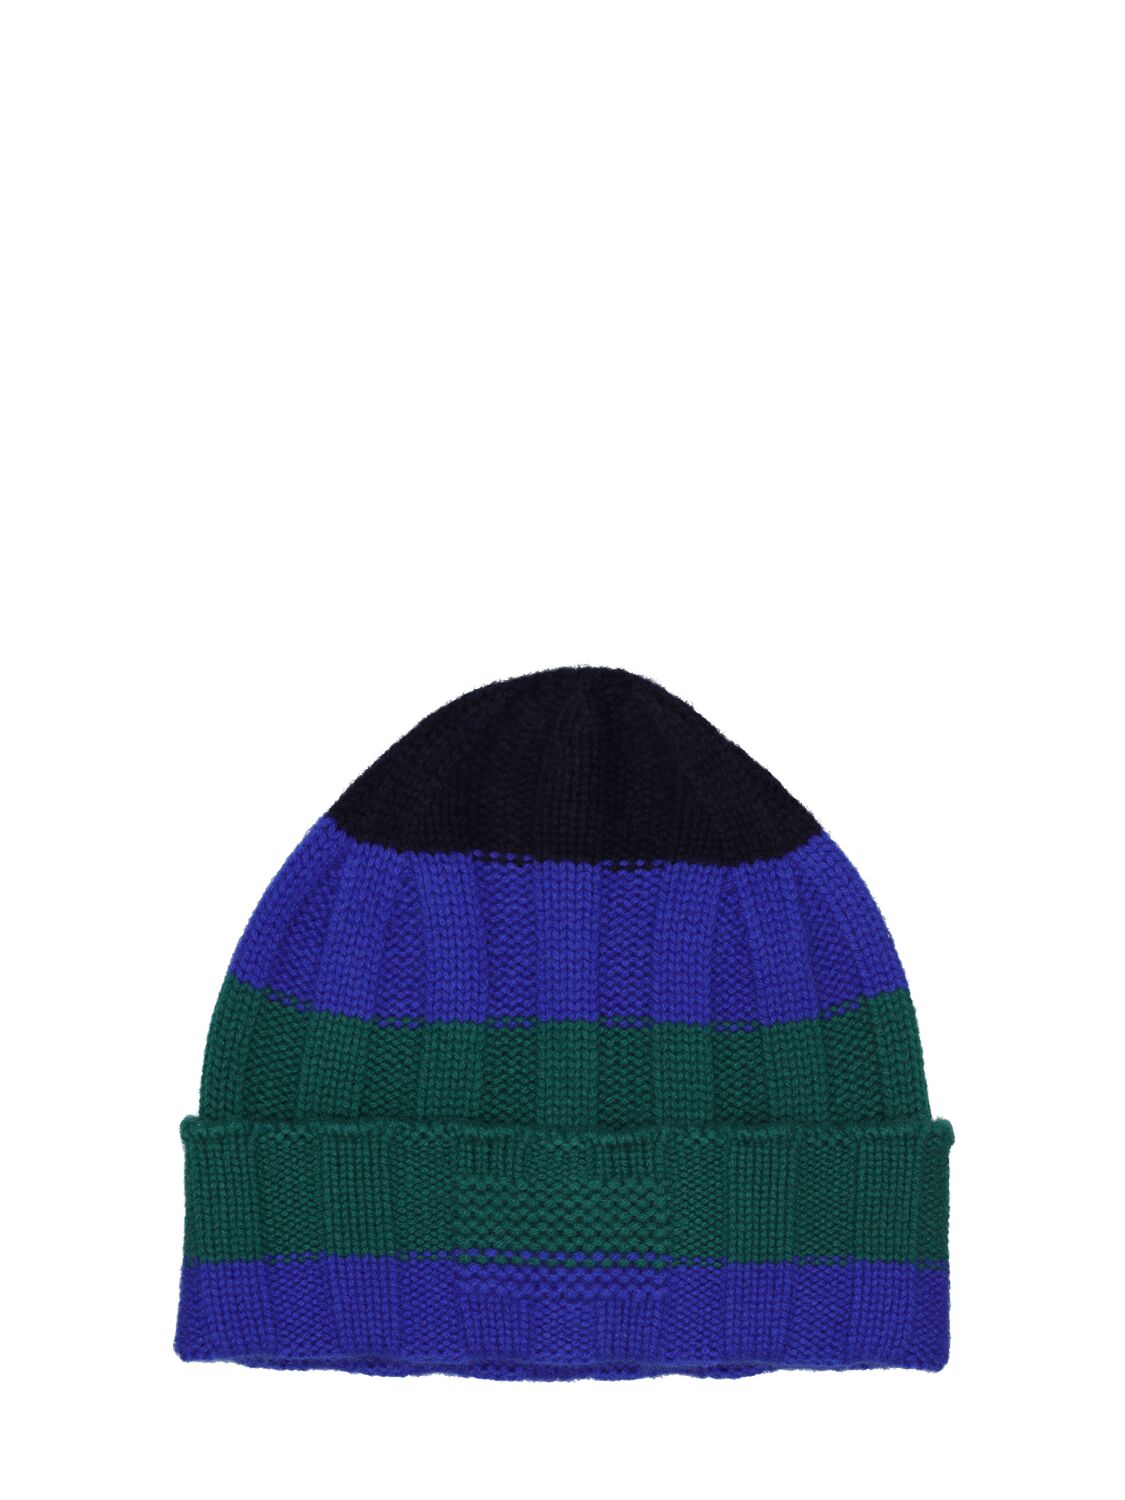 Guest In Residence The Rib Stripe Cashmere Hat In Green,blue